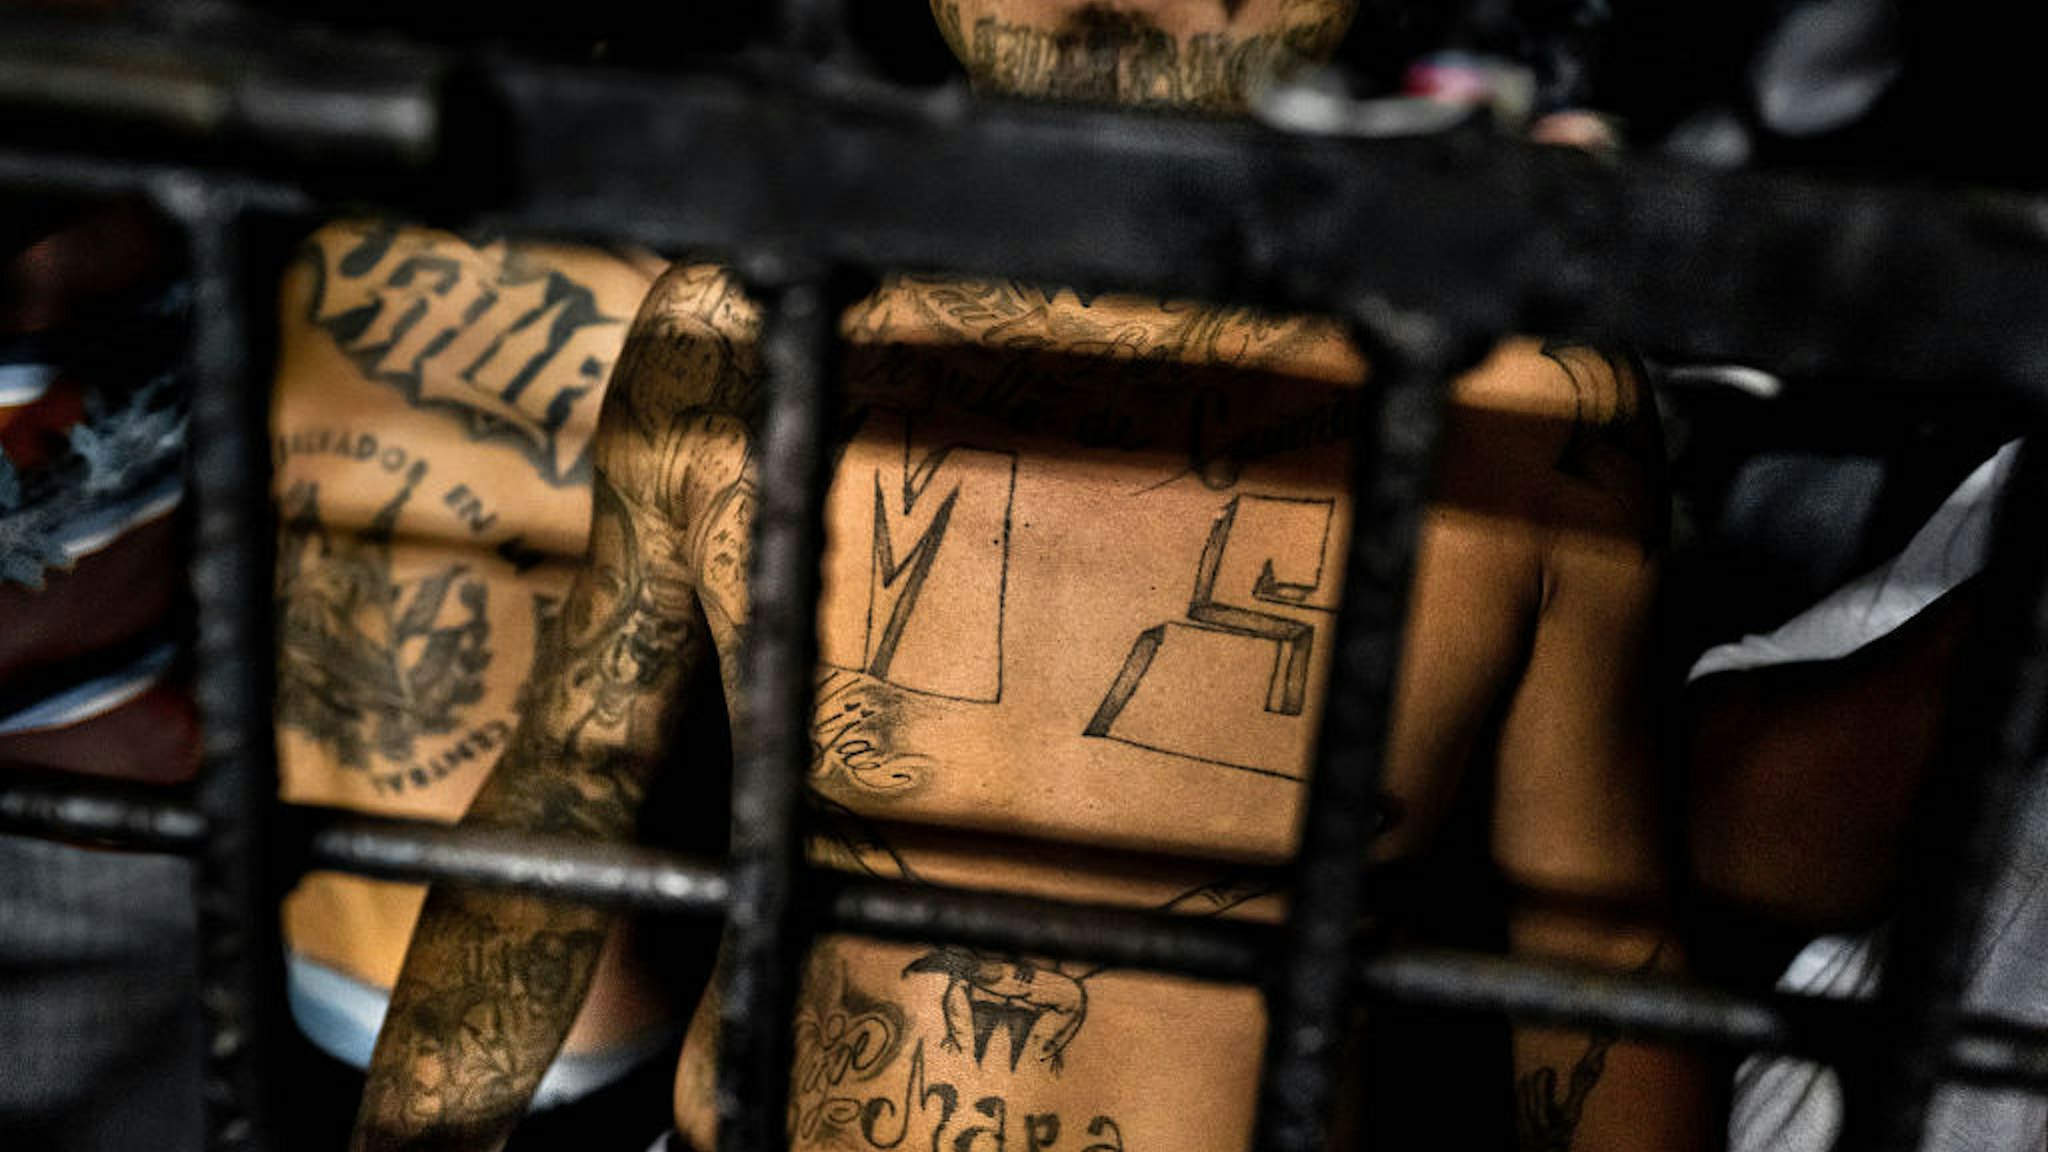 A member of the Mara Salvatrucha gang (MS-13) stands behind bars in a cell at a detention center on February 20, 2014 in San Salvador, El Salvador. Although the country's two major gangs reached a truce in 2012, the police holding cells currently house more than 3000 inmates, five times the official capacity. Partly because Mara gang members did not break with their criminal activities, partly because Salvadorean police still applies a controversial anti-gang law which allows to detain almost anyone for suspicion of gang membership. Accused young men are held in police detention centers where up to 25 inmates may share a cell of five square metres. In the dark overcrowded cages, under harsh and life-threatening conditions, suspected gang members wait for trial or for to be transported to a regular prison. (Photo by Jan Sochor/LatinContent/Getty Images)